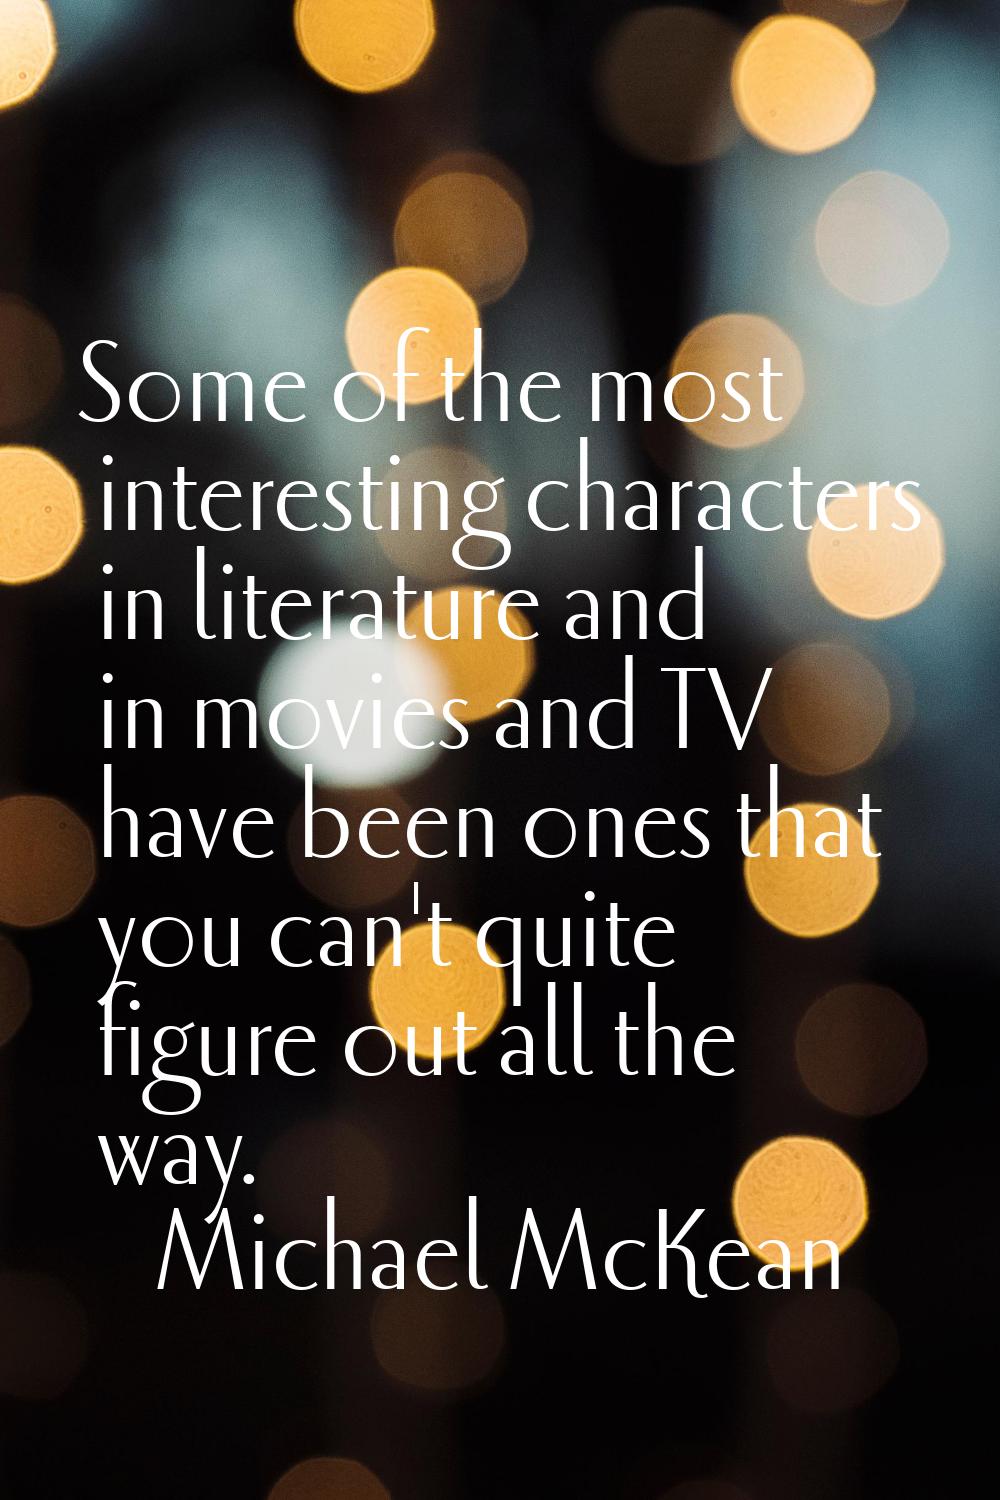 Some of the most interesting characters in literature and in movies and TV have been ones that you 